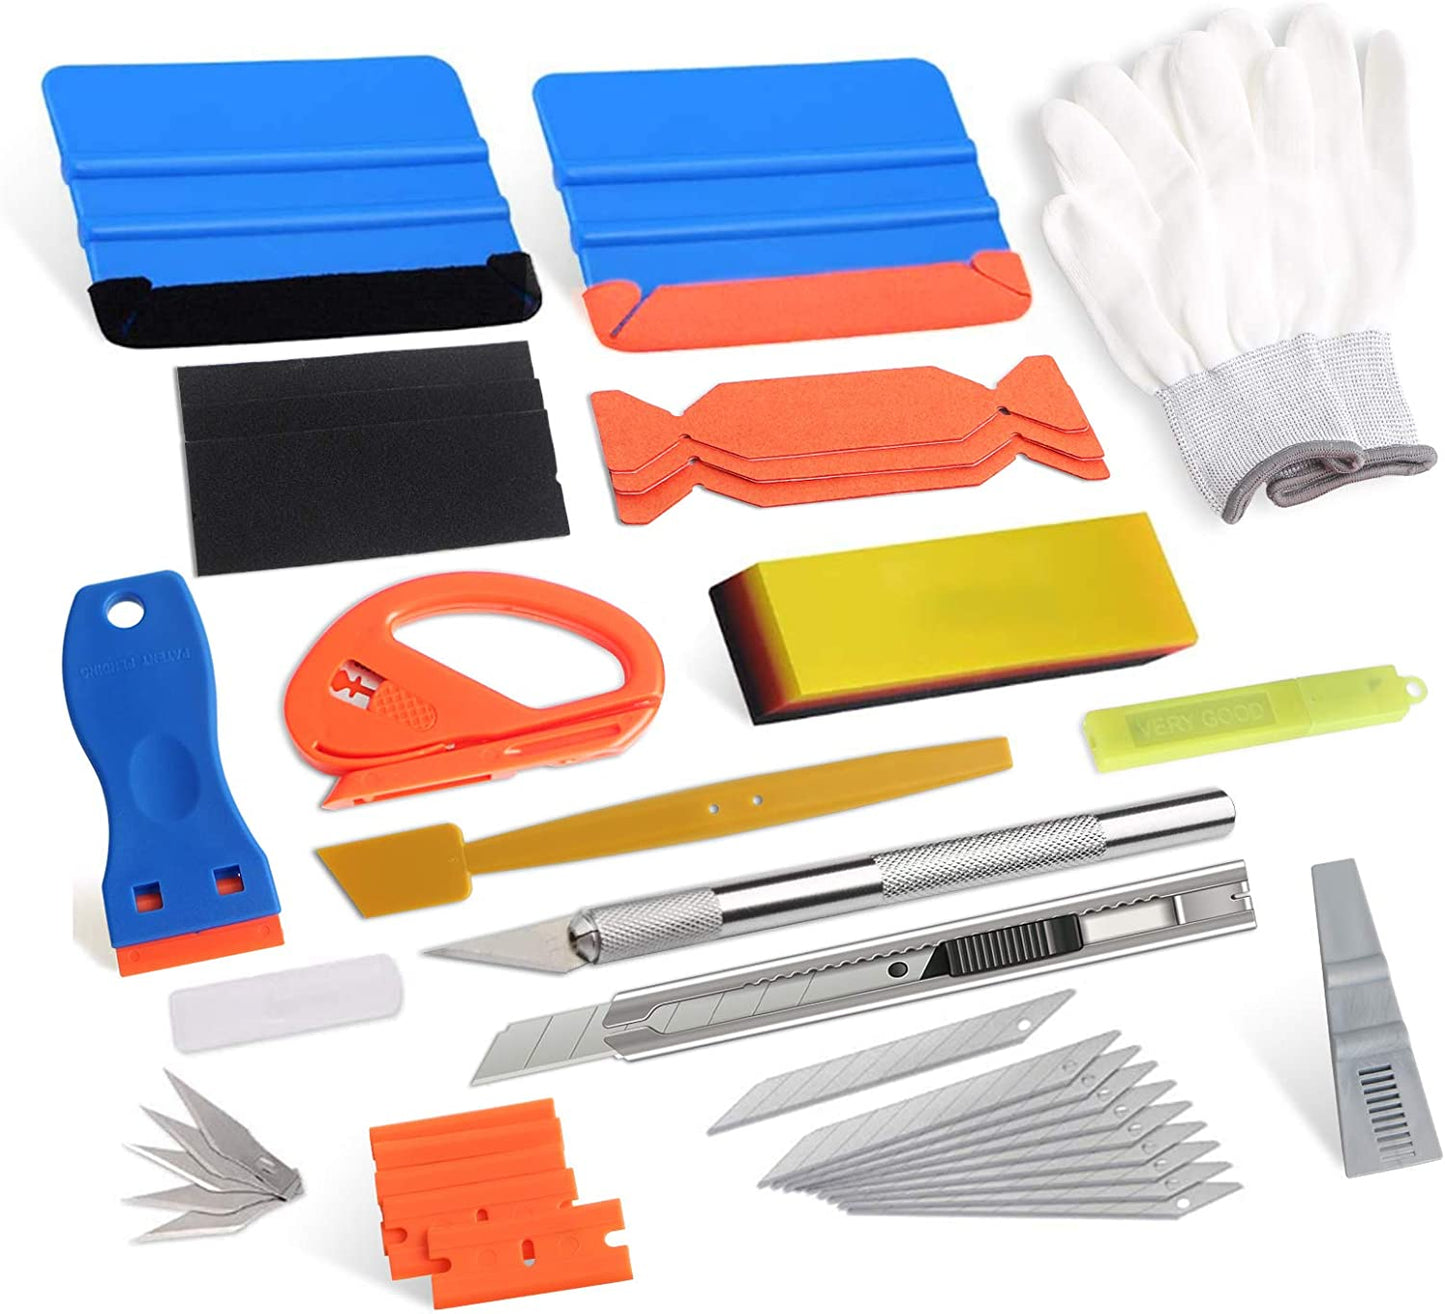 Car Wrap Vinyl Tool Kit Vehicle Window Tint Film Vynil Wrap Assecories with 4 inch Felt Squeegee, PPF Scraper Tool, Safety Cutter, Utility Knife & Blades for Wrapping Wallpaper